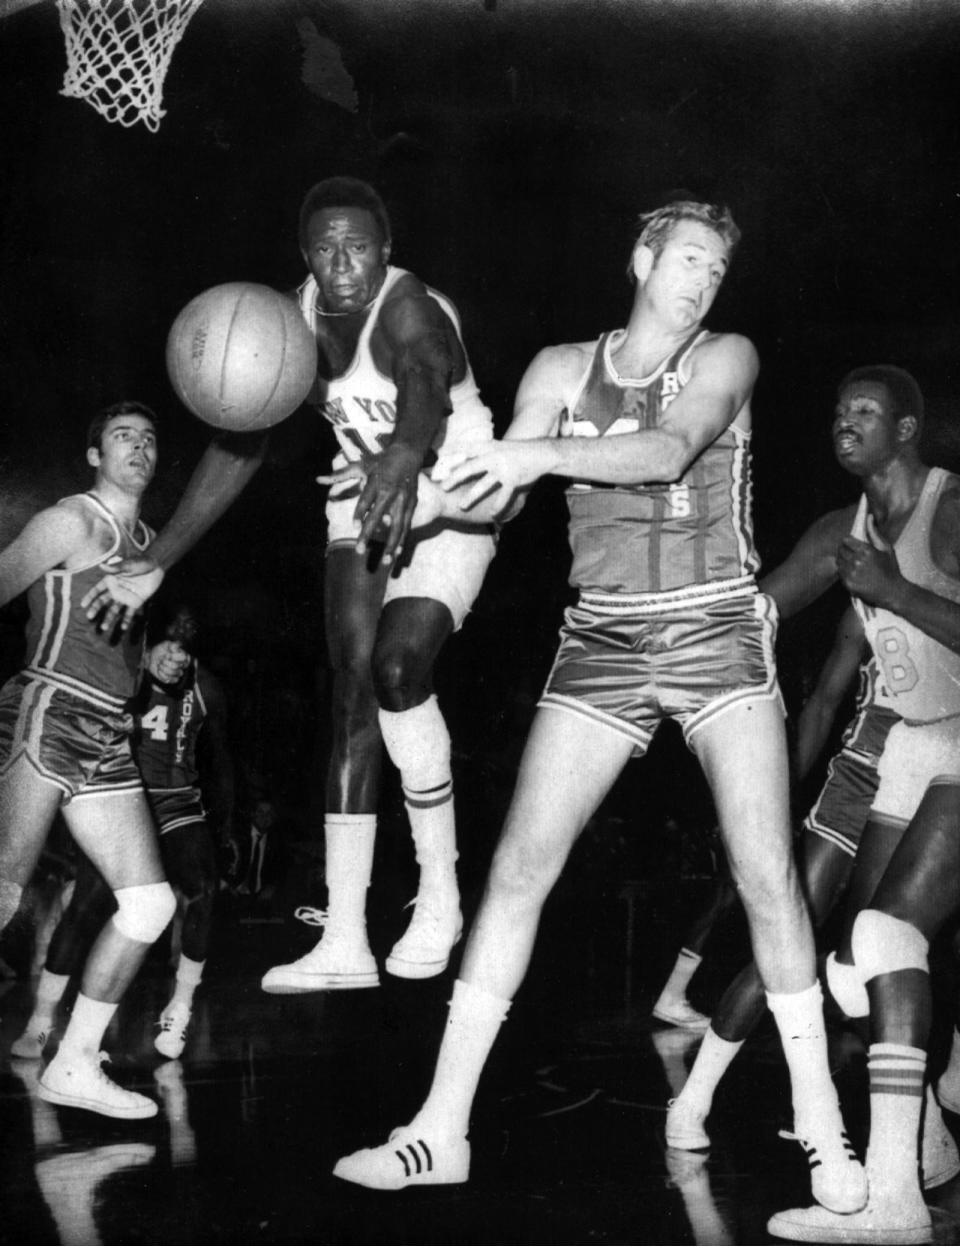 OCTOBER 27, 1968: Floating Reed: Willis Reed of the New York Knicks appears to be floating as he and Cincinnati's Connie Dierking (No. 24) try  for a loose ball in the first quarter of their NBA game at Madison Square Garden Saturday, 10/26/68, night. At left is Royals' Jerry Lucas (No. 16) and at right is Walt Bellamy of the Knicks (No. 8). The Knicks won, 98-92.